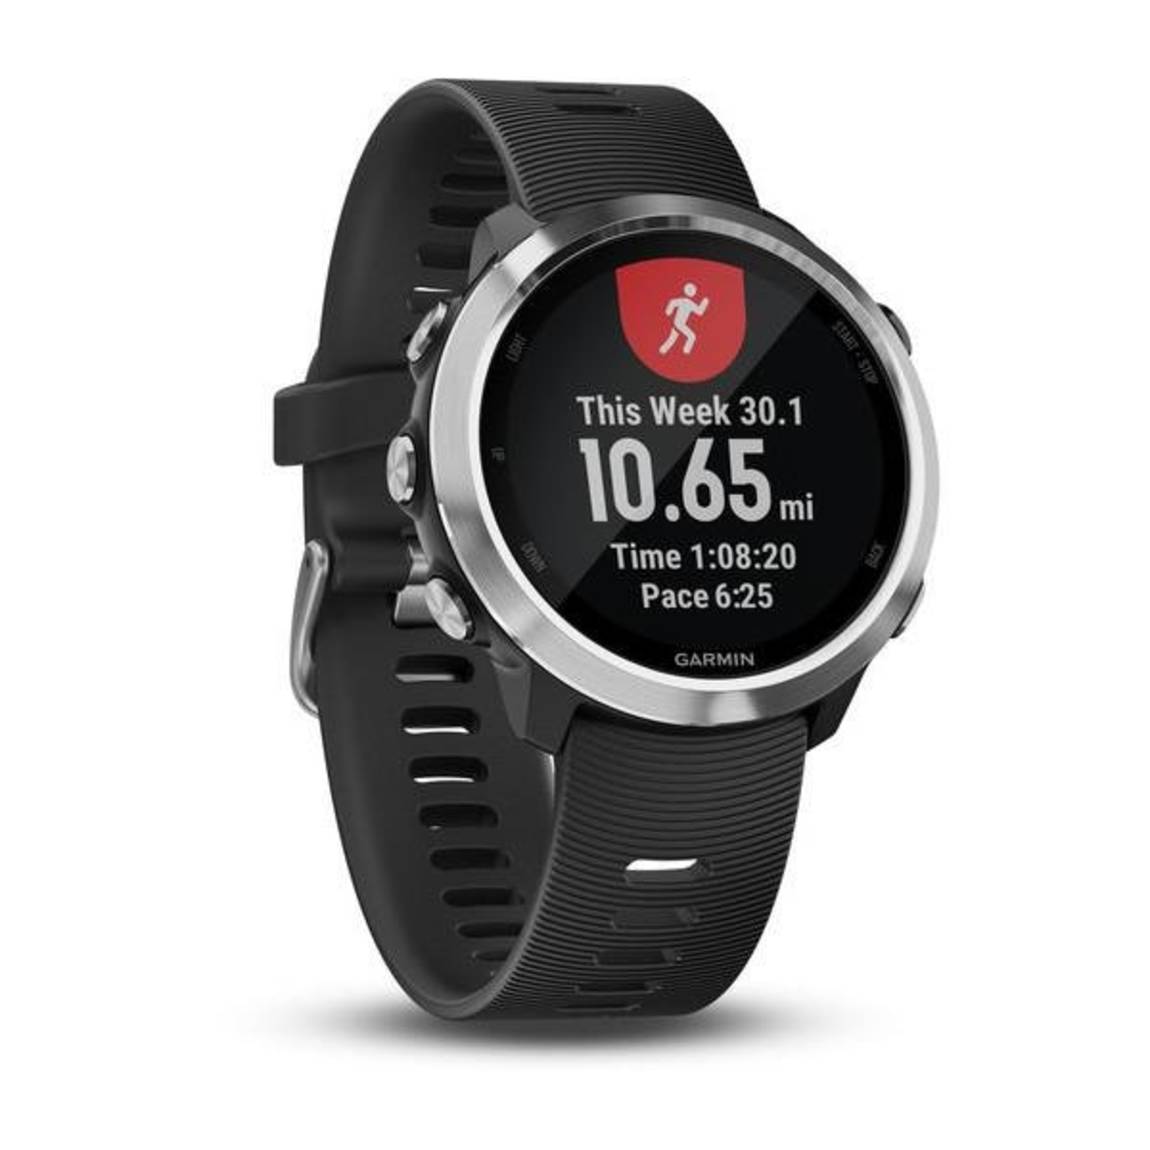 Best Trail Running Watches Top 5 Models In 2019